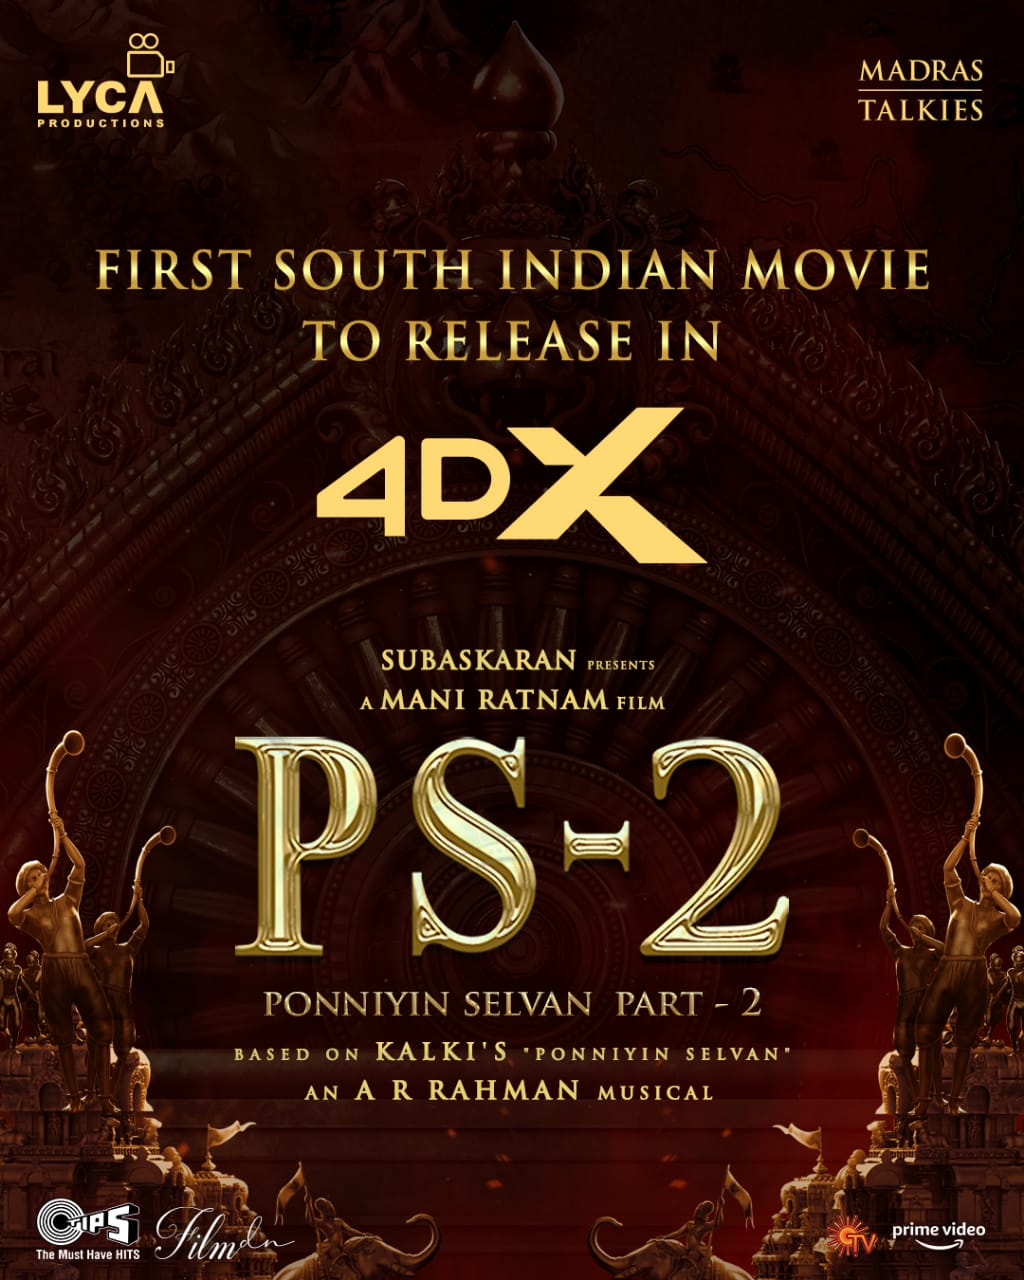 PS2 will be the 1st South Indian Movie to release in 4DX 